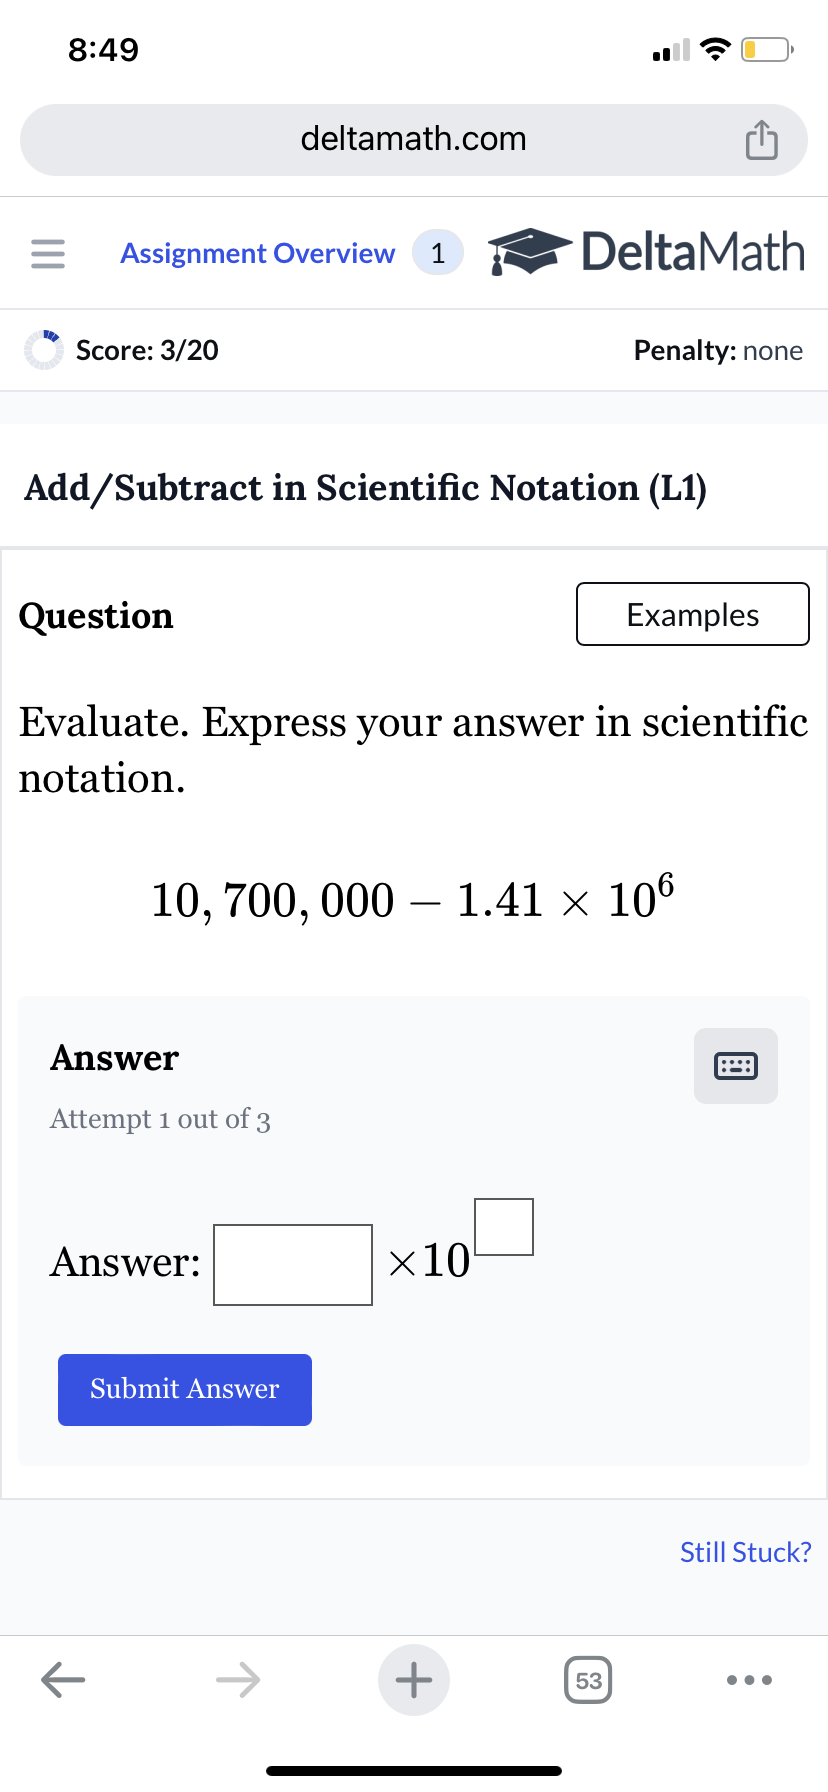 8:49
deltamath.com
= Assignment Overview 1
DeltaMath
Score: 3/20
Penalty: none
Add/Subtract in Scientific Notation (L1)
Question
Examples
Evaluate. Express your answer in scientific
notation.
10, 700,000 - 1.41 × 106
Answer
Attempt 1 out of 3
Answer:
Submit Answer
×10
←
+
53
Still Stuck?